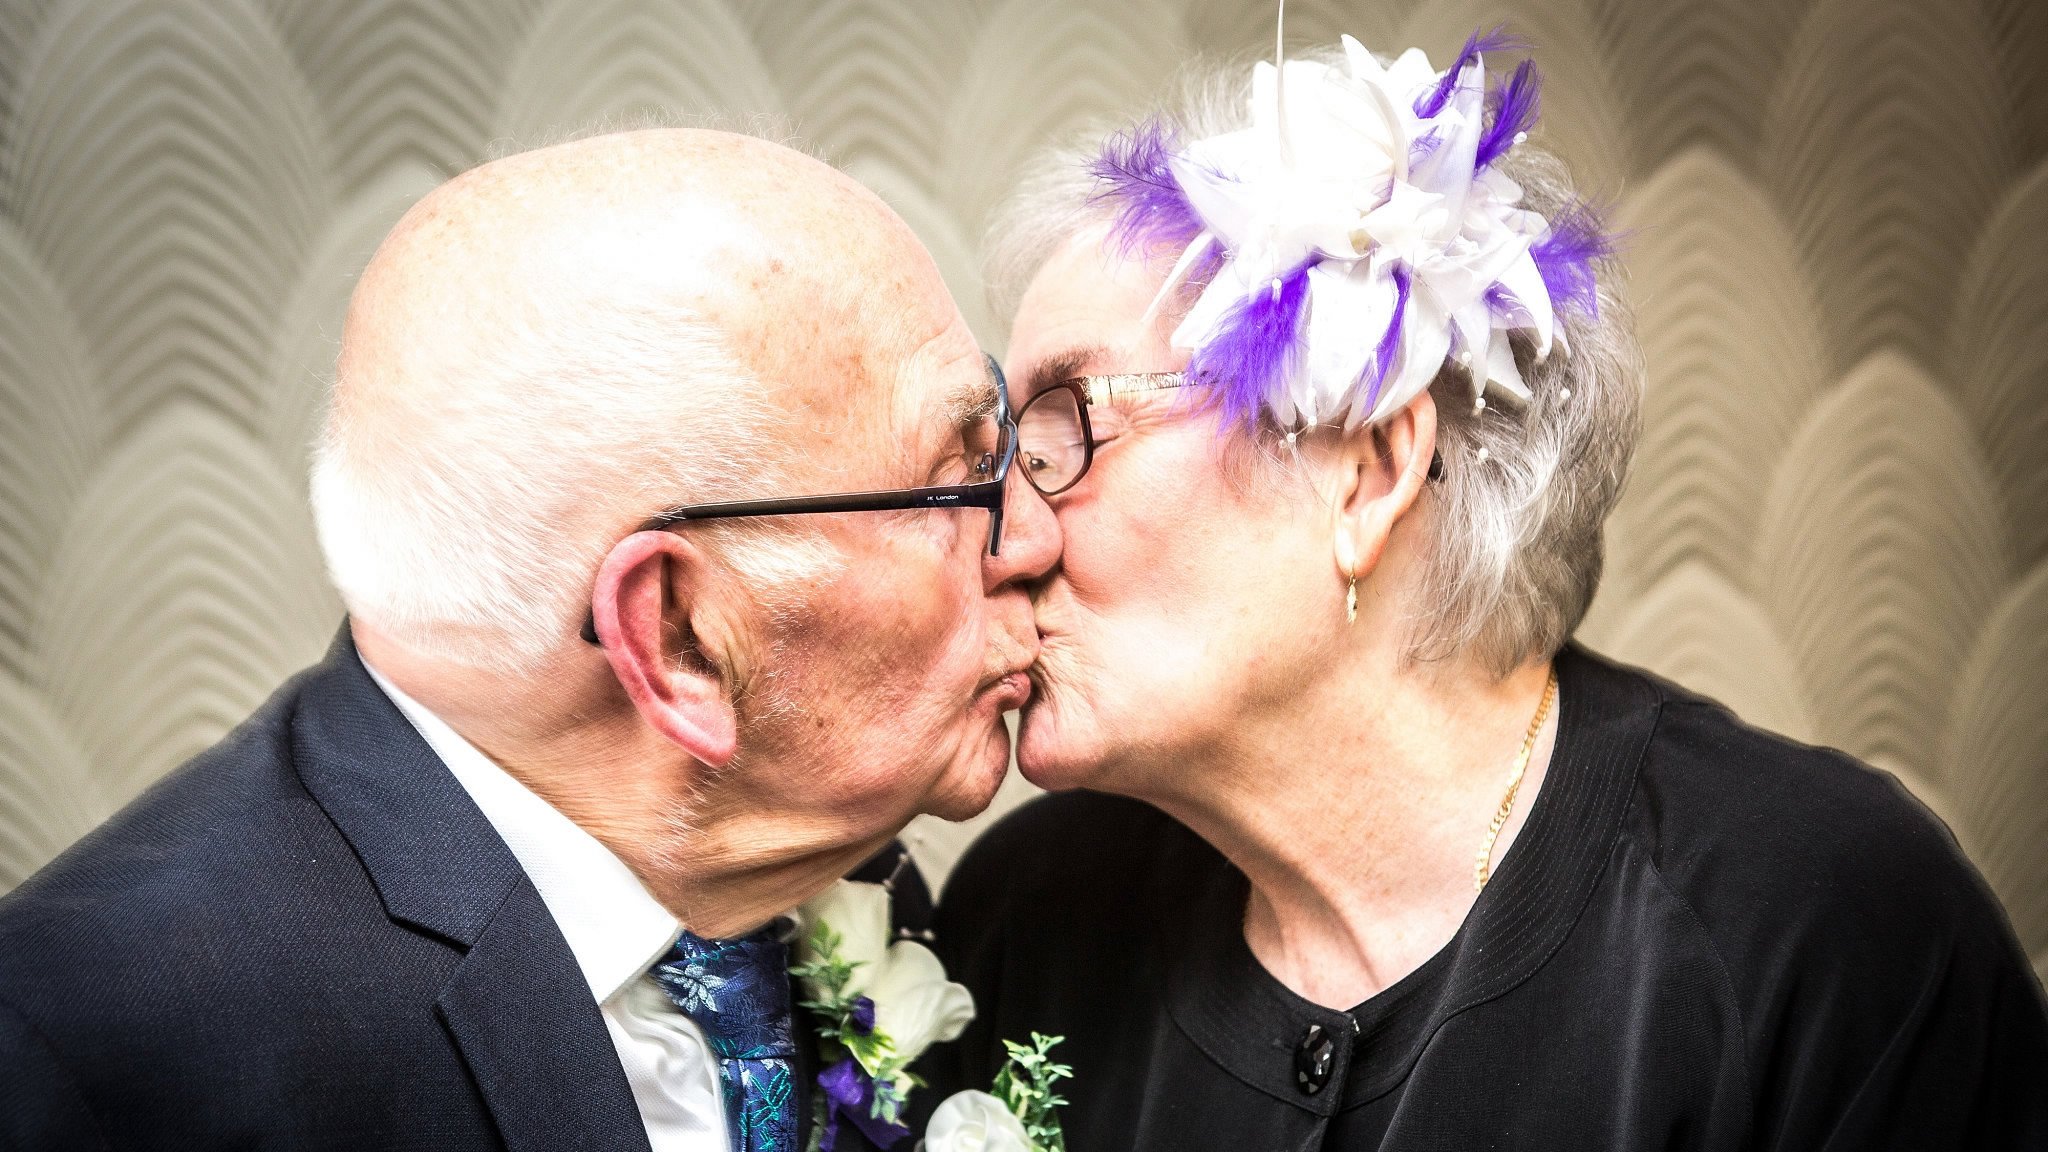 British couple with combined age of 171 get married